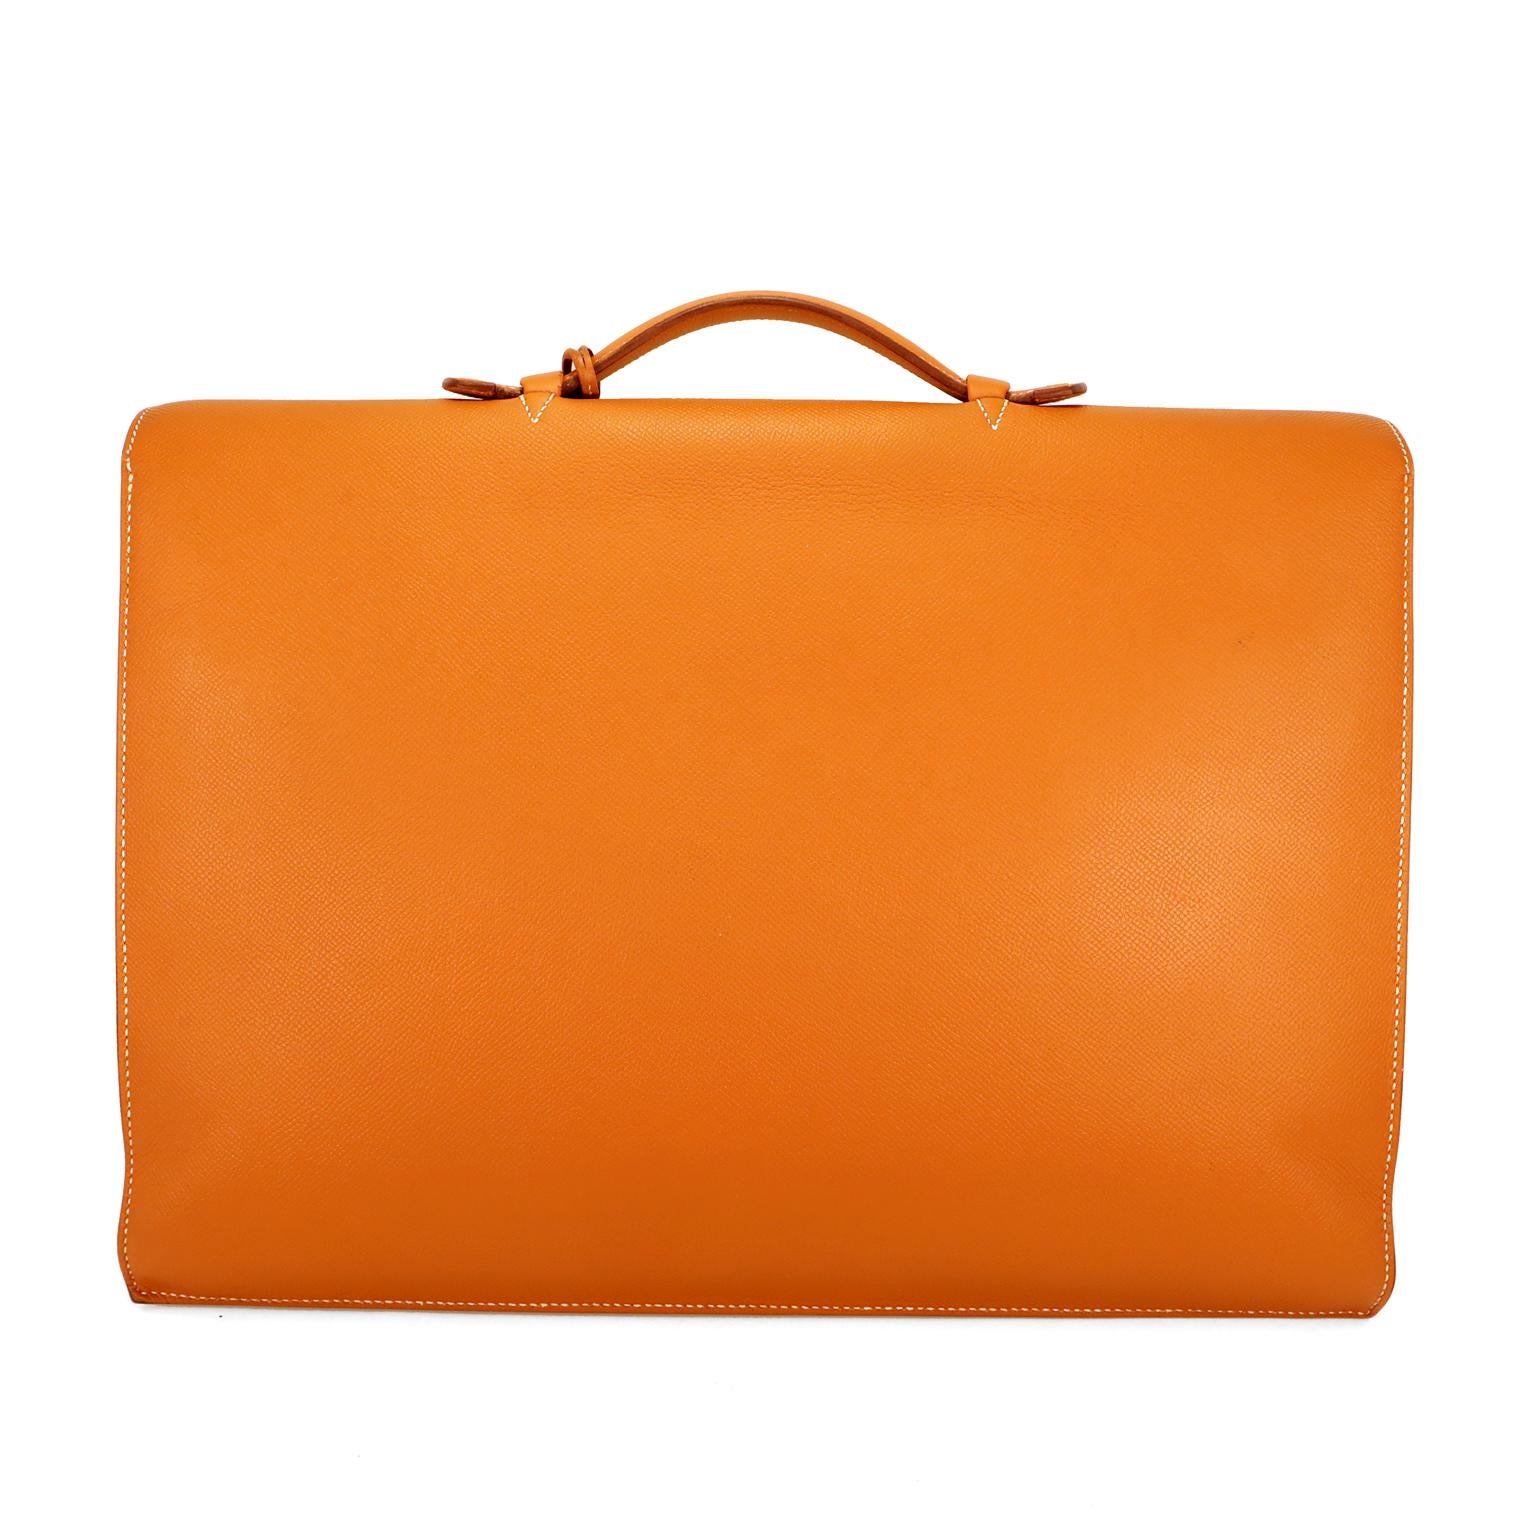 This authentic Hermès Sac a Depeches Gold Epsom Leather Briefcase is in excellent condition.  Durable textured Epsom leather, palladium hardware.  Made in France.   

Measurements:  16